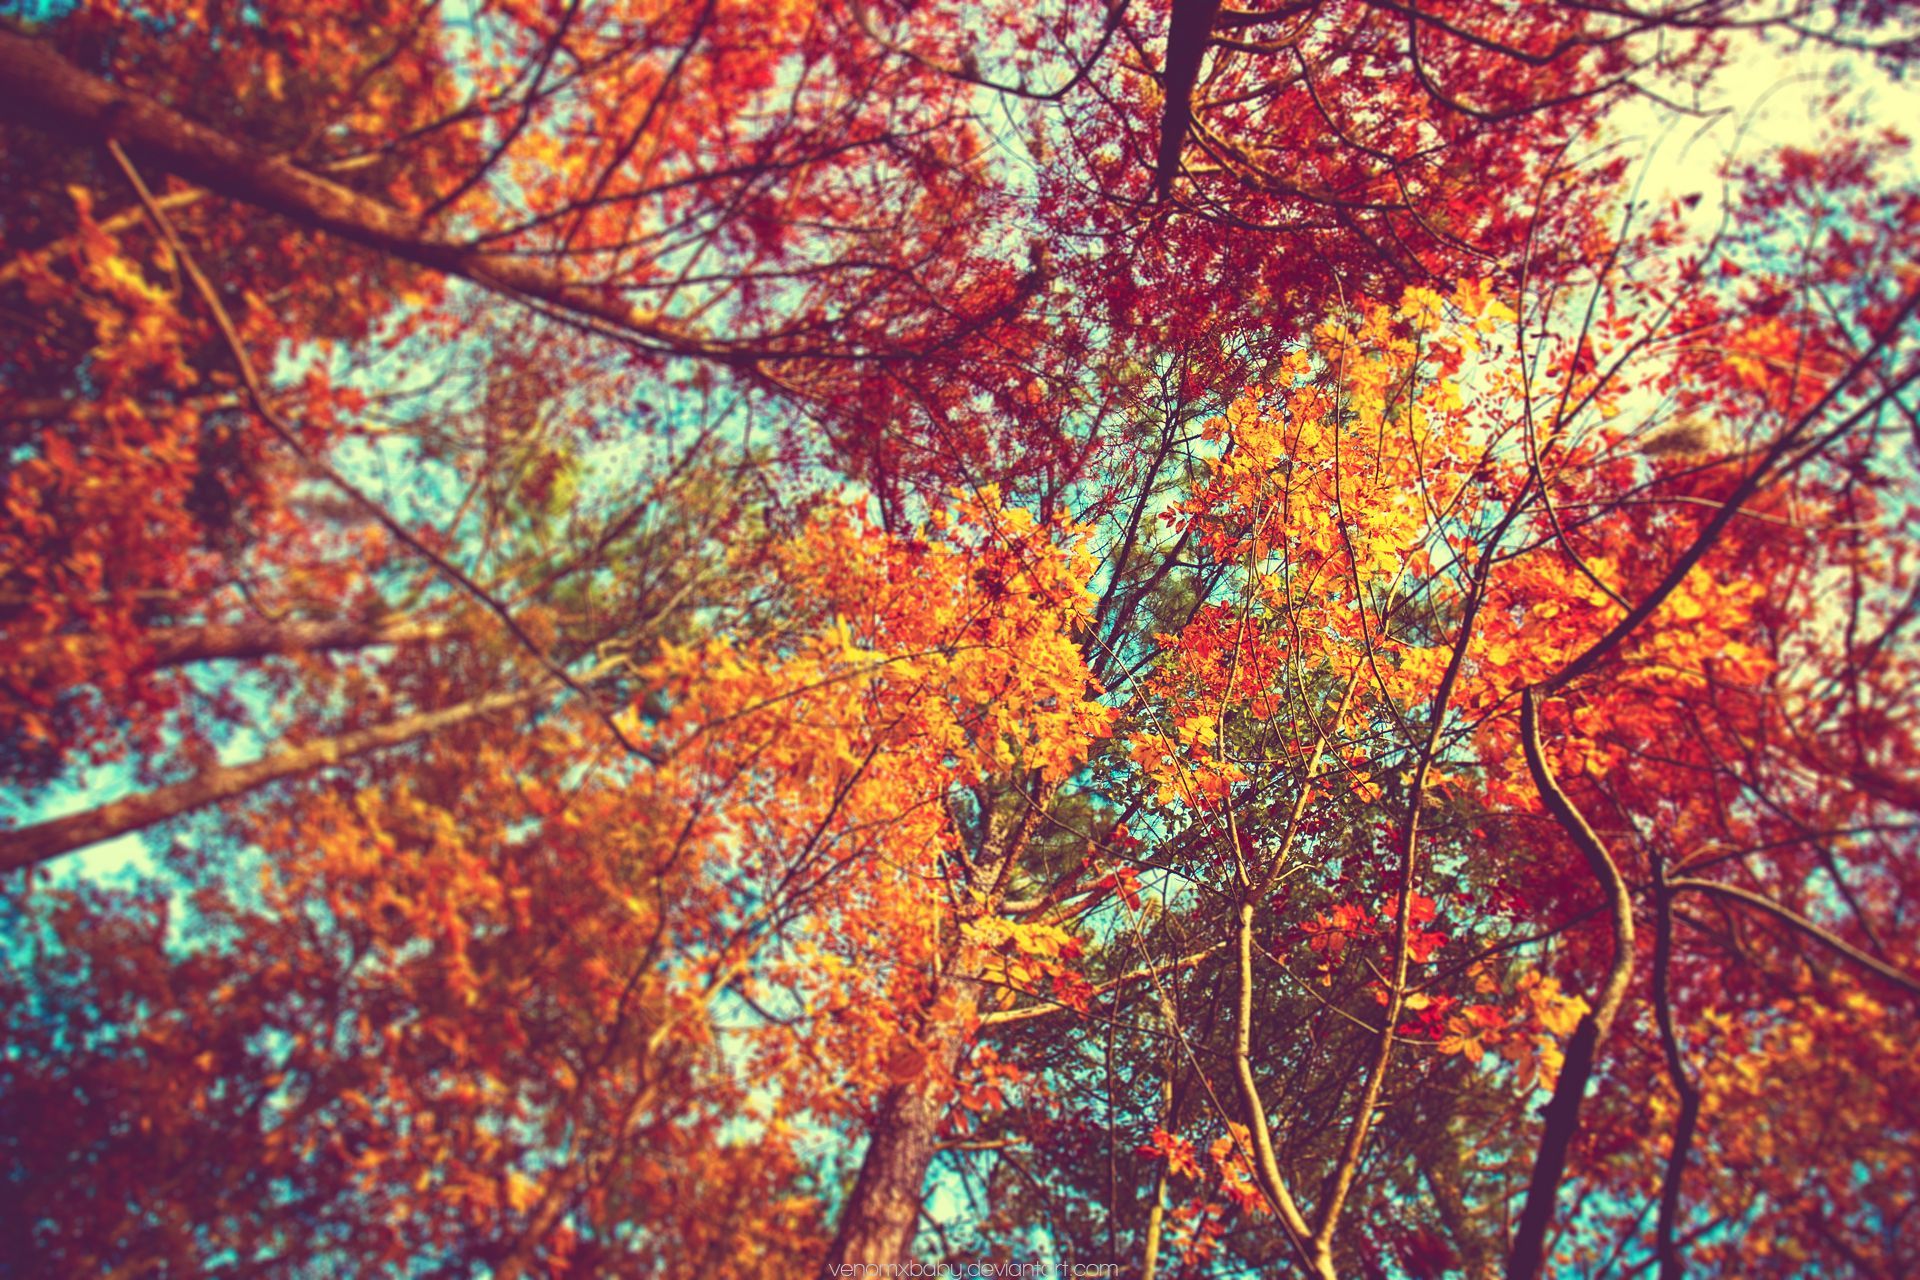 A view of the sky through trees with leaves - Fall